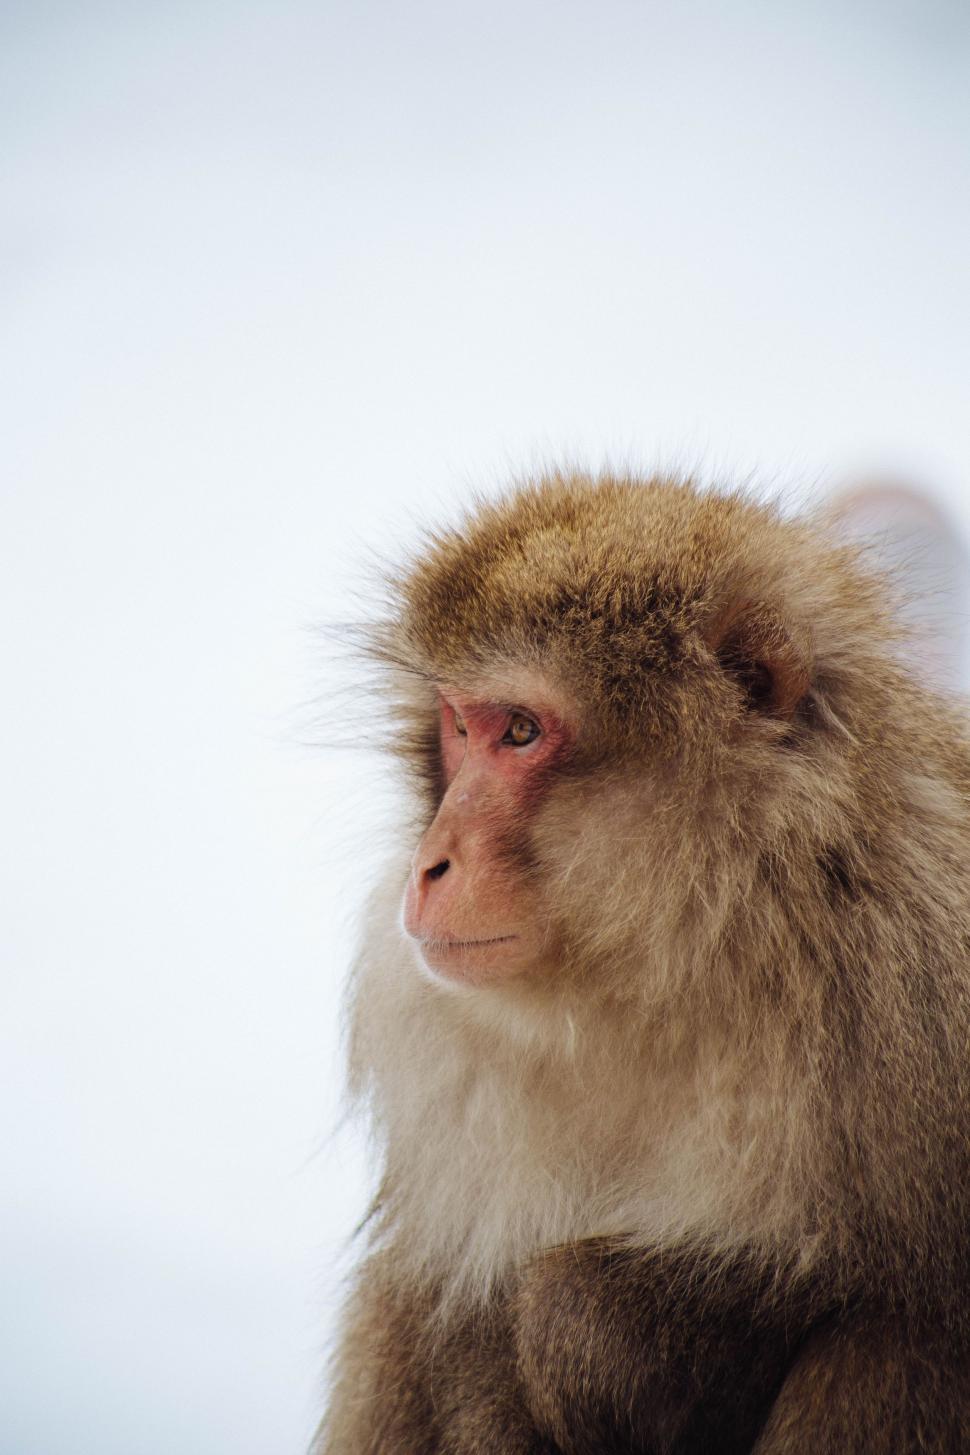 Free Image of Monkey Sitting on Top of Wooden Table 